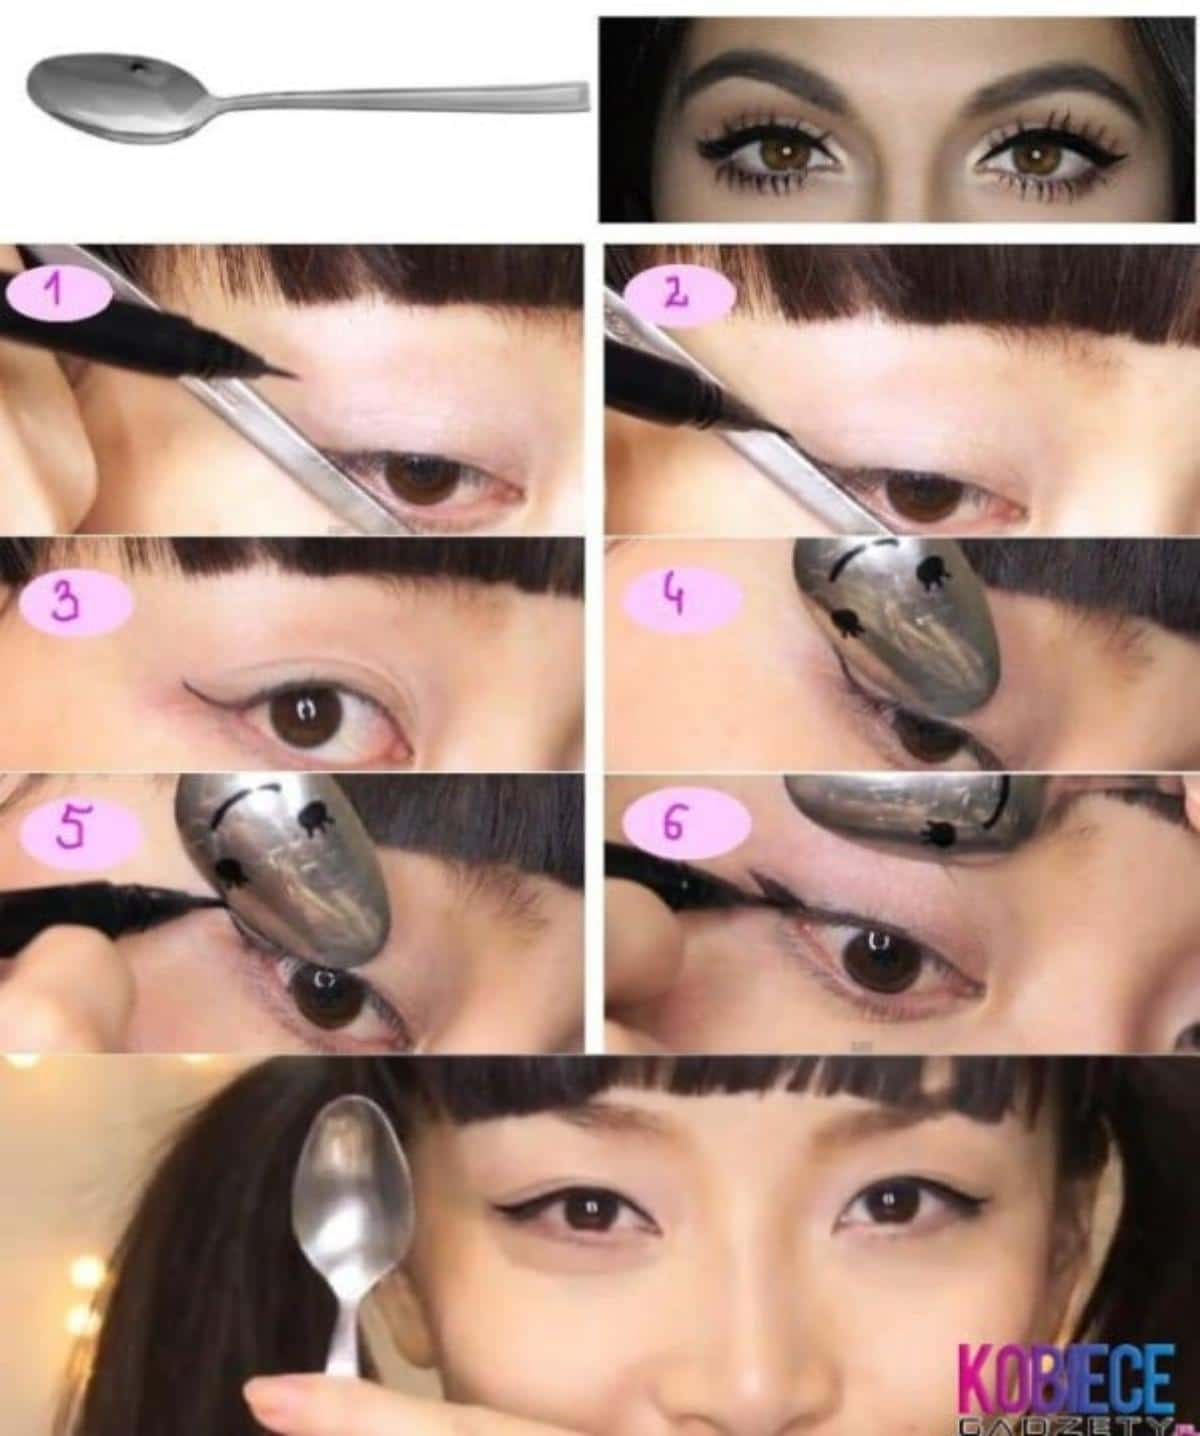 Get Winged Shape Eye Liner with a Spoon collage.